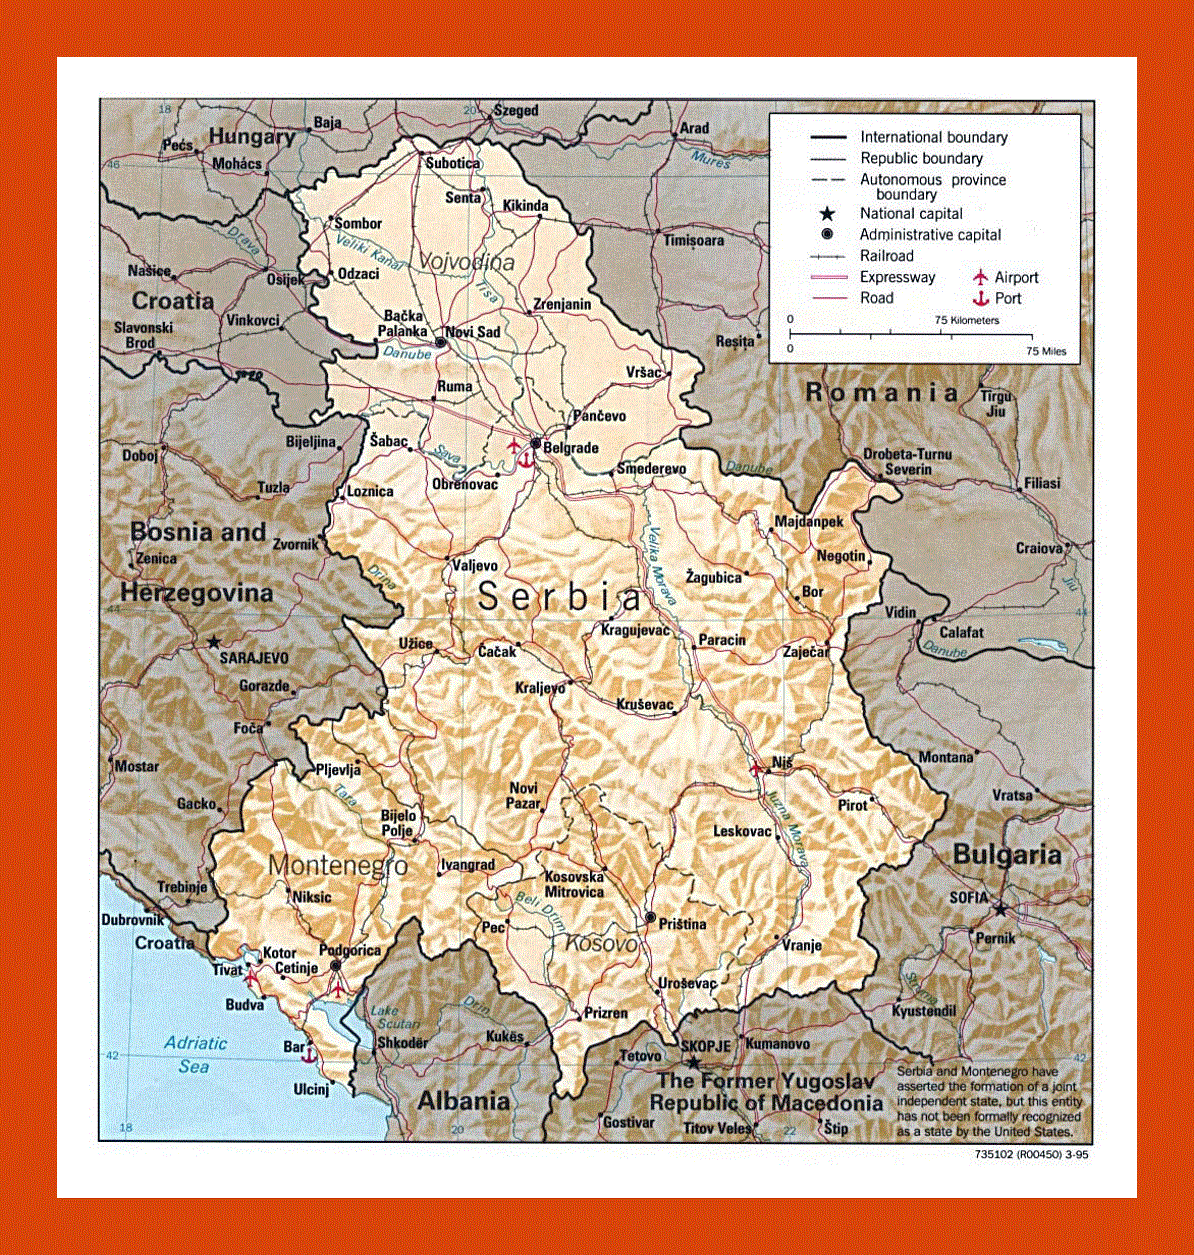 Political map of Serbia and Montenegro - 1995